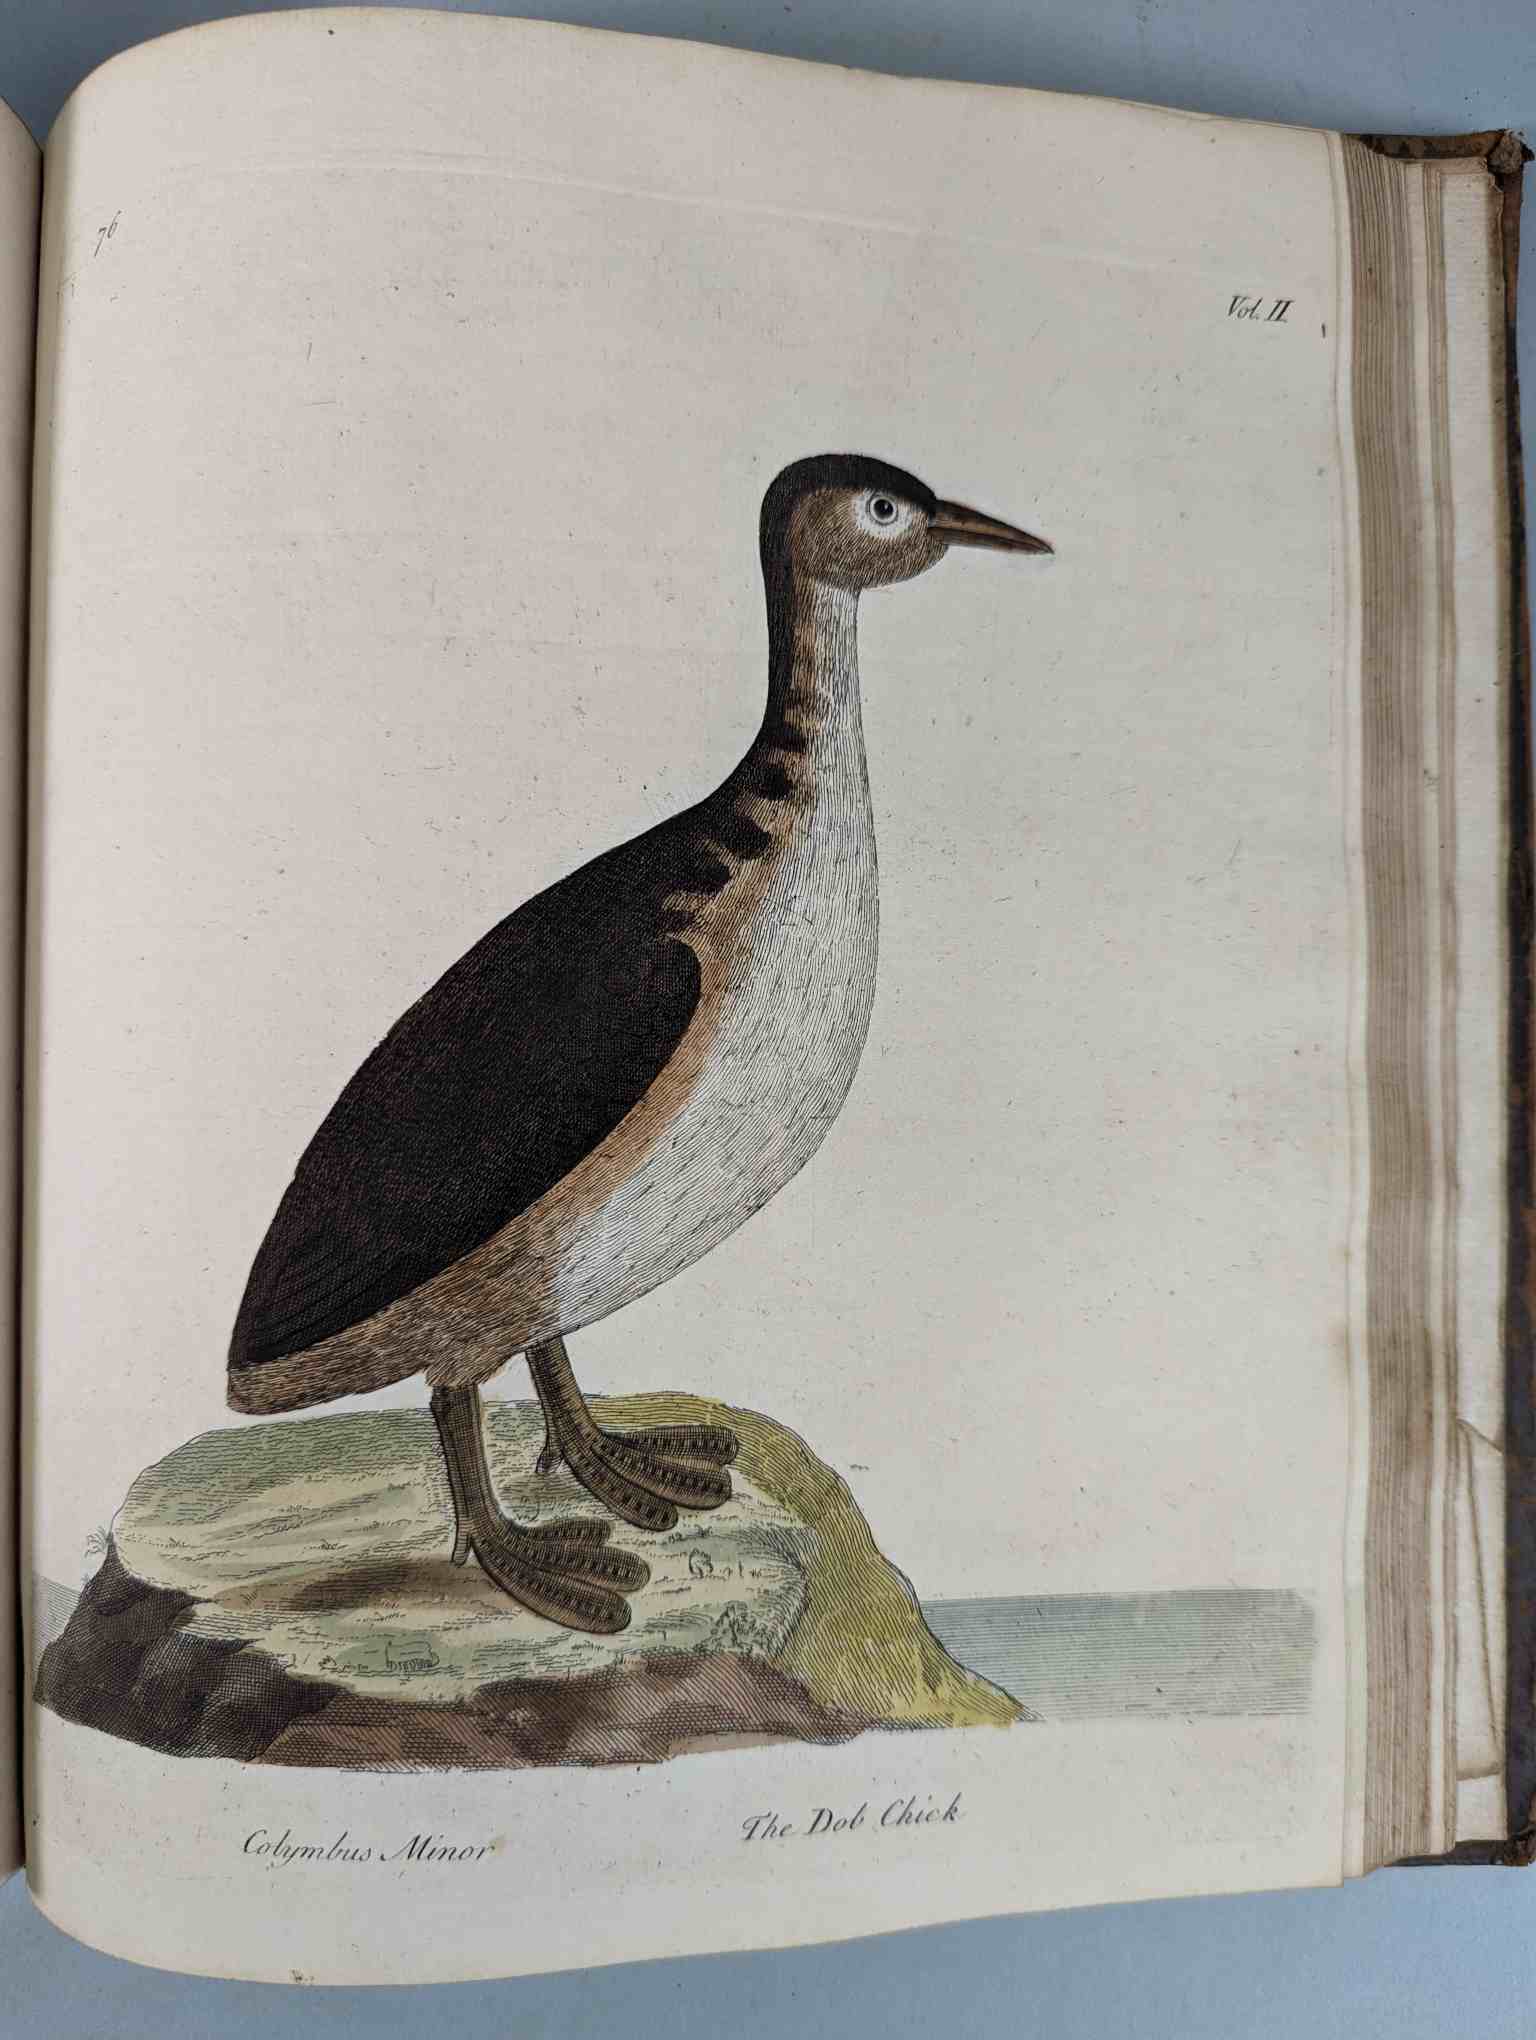 ALBIN, Eleazar. A Natural History of Birds, to which are added, Notes and Observations by W. - Image 180 of 208